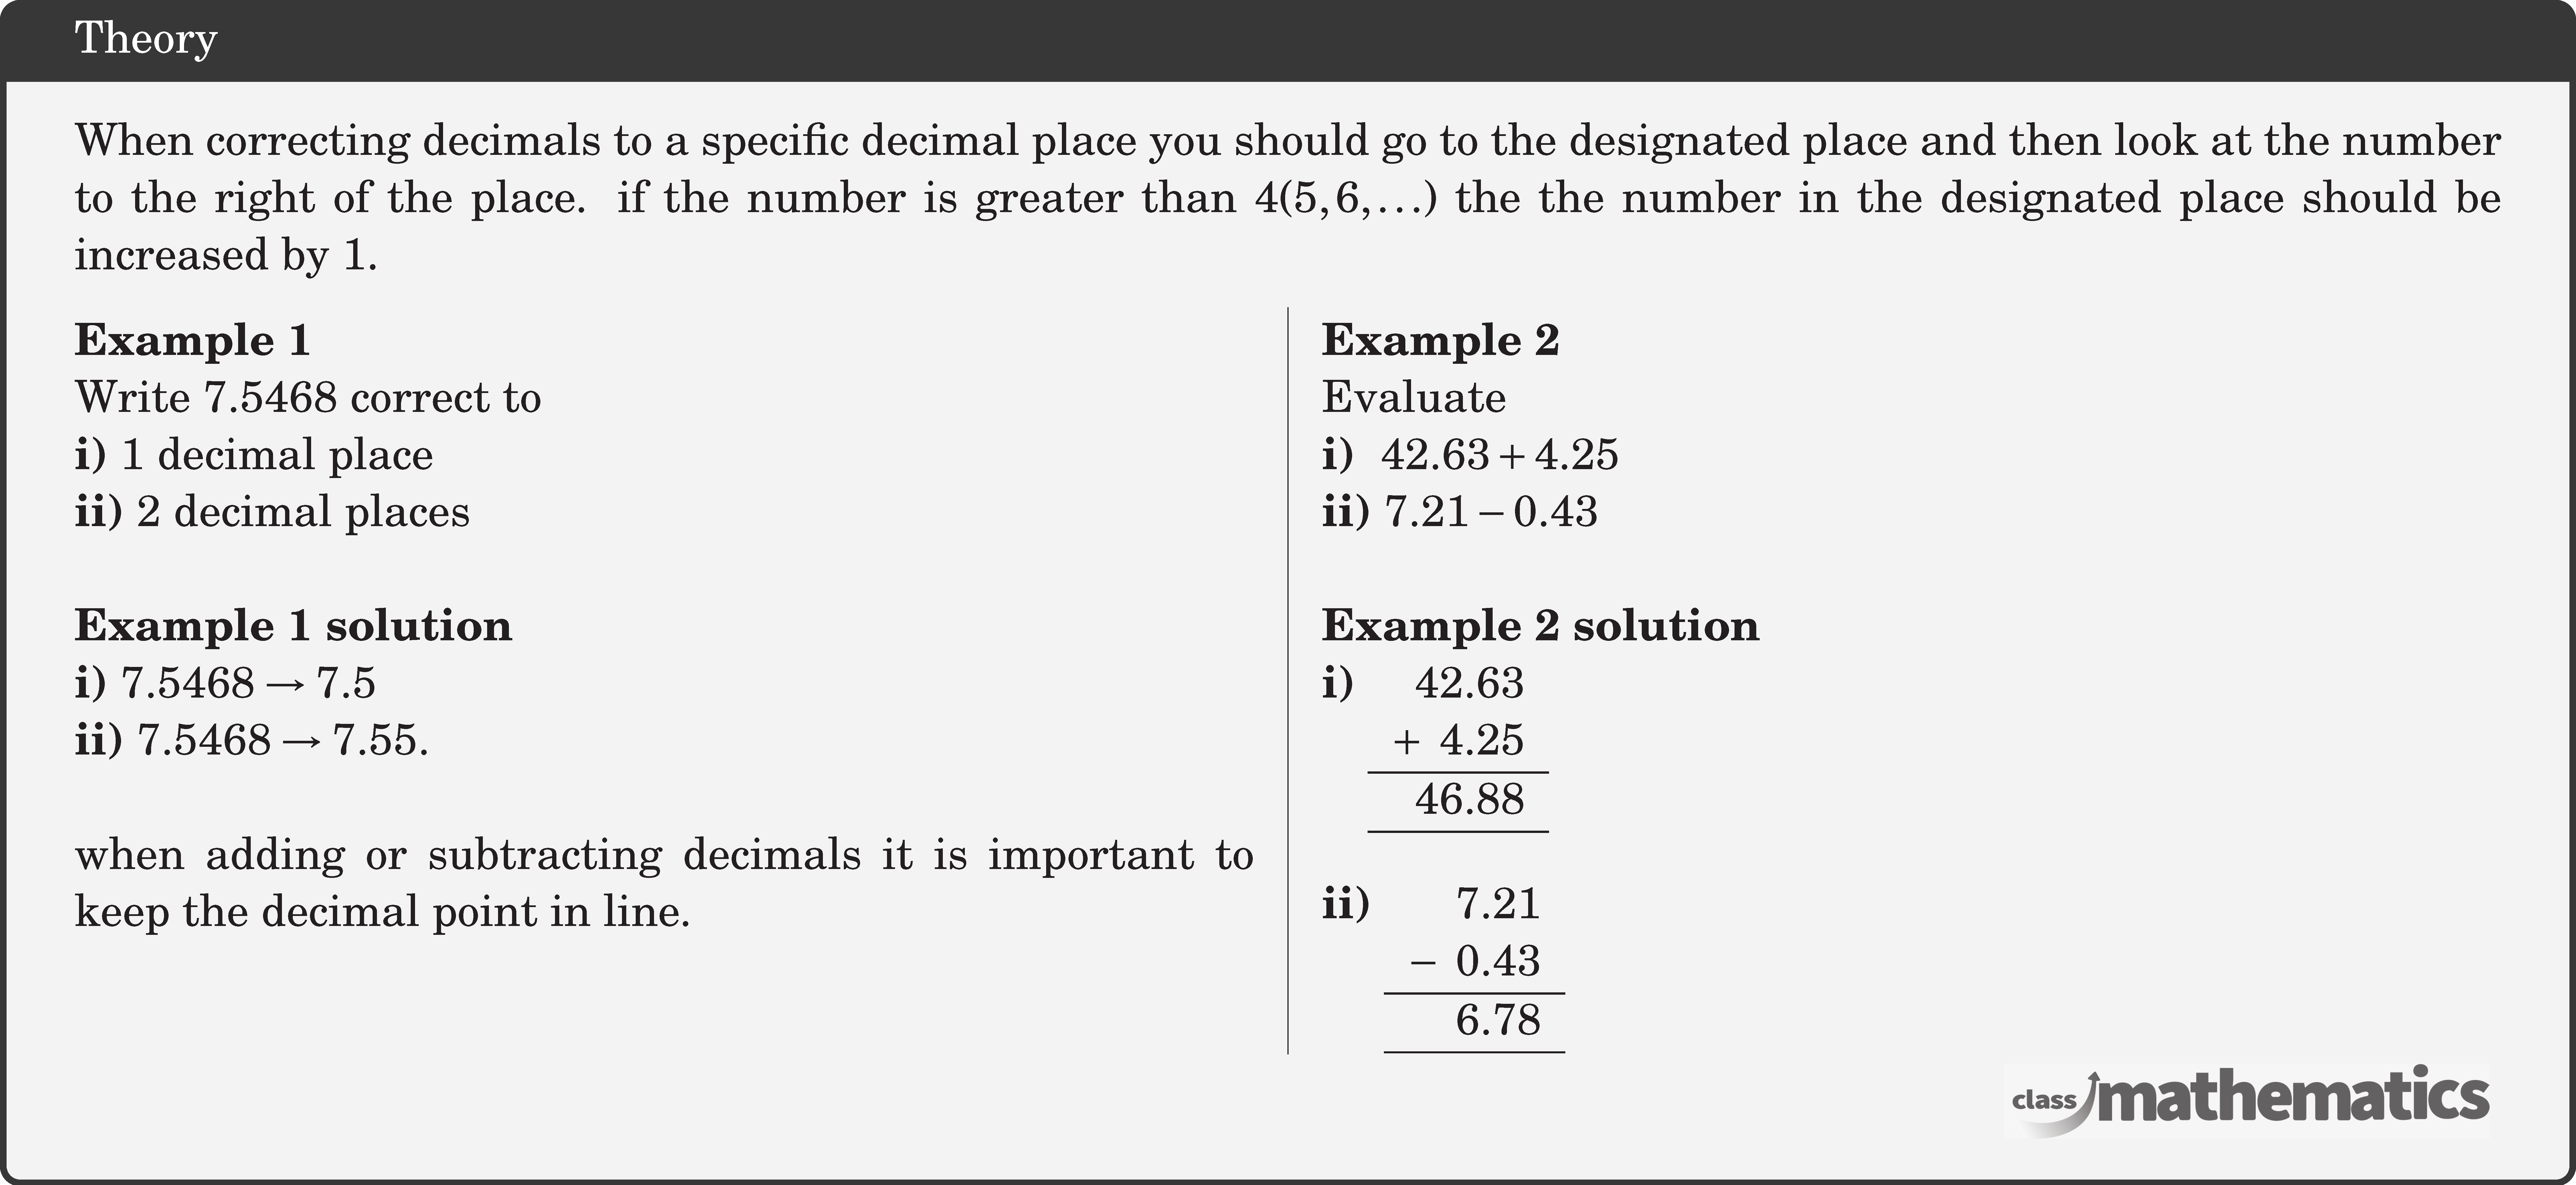 When correcting decimals to a specific decimal place you should go to the designated place and then look at the number to the right of the place. if the number is greater than \(4(5,6, \ldots)\) the the number in the designated place should be increased by 1. \begin{multicols}{2}  \textbf{Example 1}\\ Write 7.5468 correct to\\ \textbf{i)} 1 decimal place\\ \textbf{ii)} 2 decimal places\\  \textbf{Example 1 solution}\\ \textbf{i)} \(7.5468 \rightarrow 7.5\)\\ \textbf{ii)} \(7.5468 \rightarrow 7.55\).\\  when adding or subtracting decimals it is important to keep the decimal point in line.\\  \columnbreak  \textbf{Example 2}\\ Evaluate \\ \textbf{i) } \(42.63+4.25\)\\ \textbf{ii)} \(7.21-0.43\)\\  \textbf{Example 2 solution}\\ \textbf{i)} \(\begin{array}[t]{r} 42.63\\ +\;\; 4.25\\ \hline 46.88\\ \hline \end{array}\)\\[5pt]  \textbf{ii)} \(\begin{array}[t]{r} 7.21\\ -\;\; 0.43\\ \hline 6.78\\ \hline \end{array}\) \end{multicols}